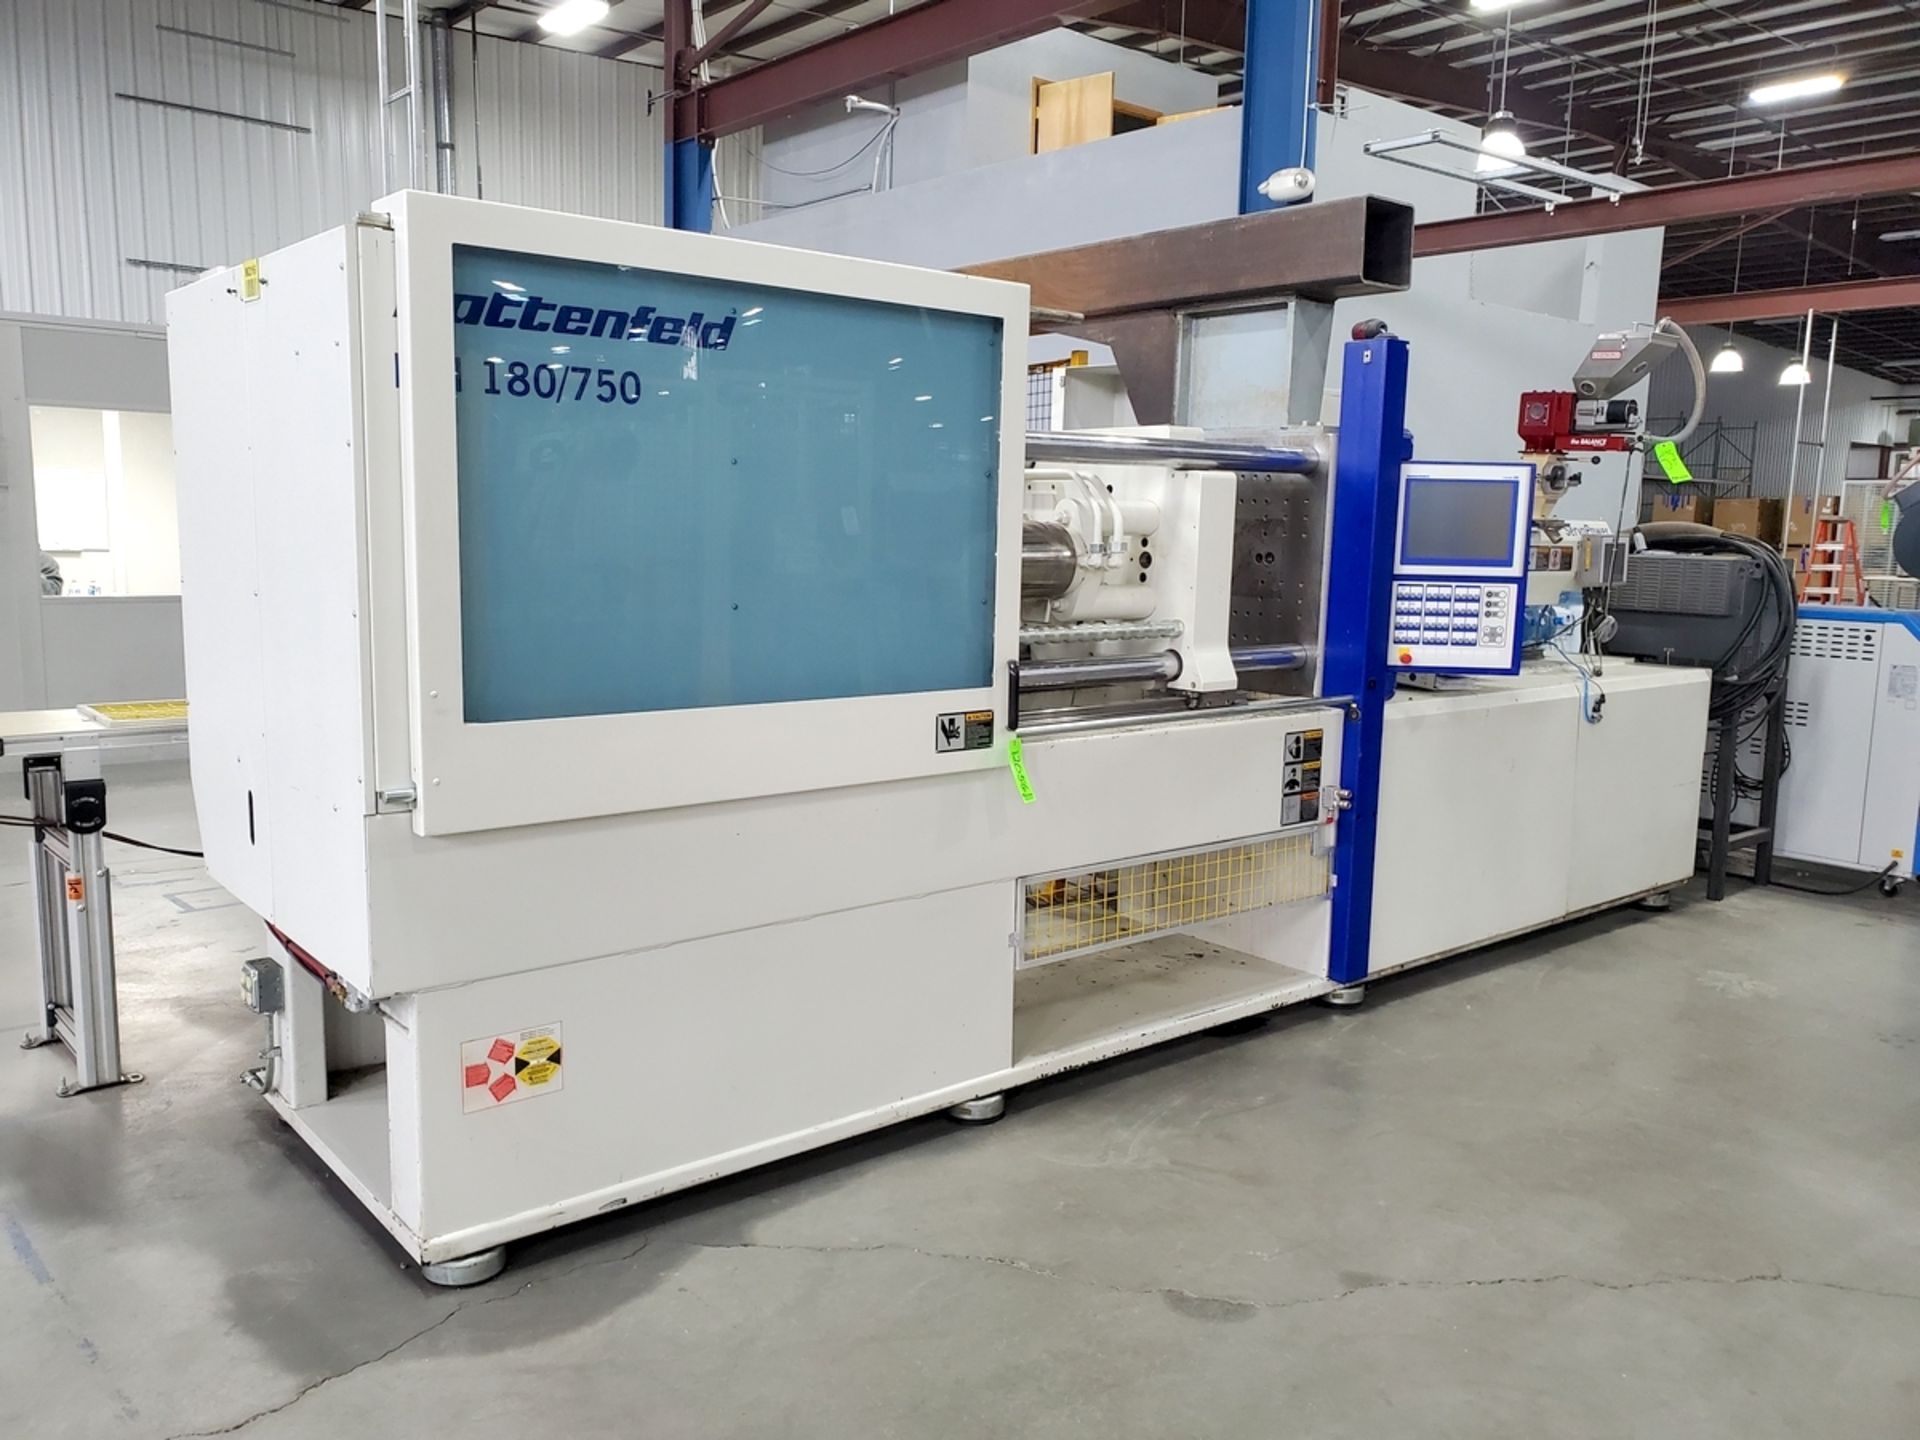 Battenfeld HM 180/750, 180 Ton Injection Molding Machine, New in 2013